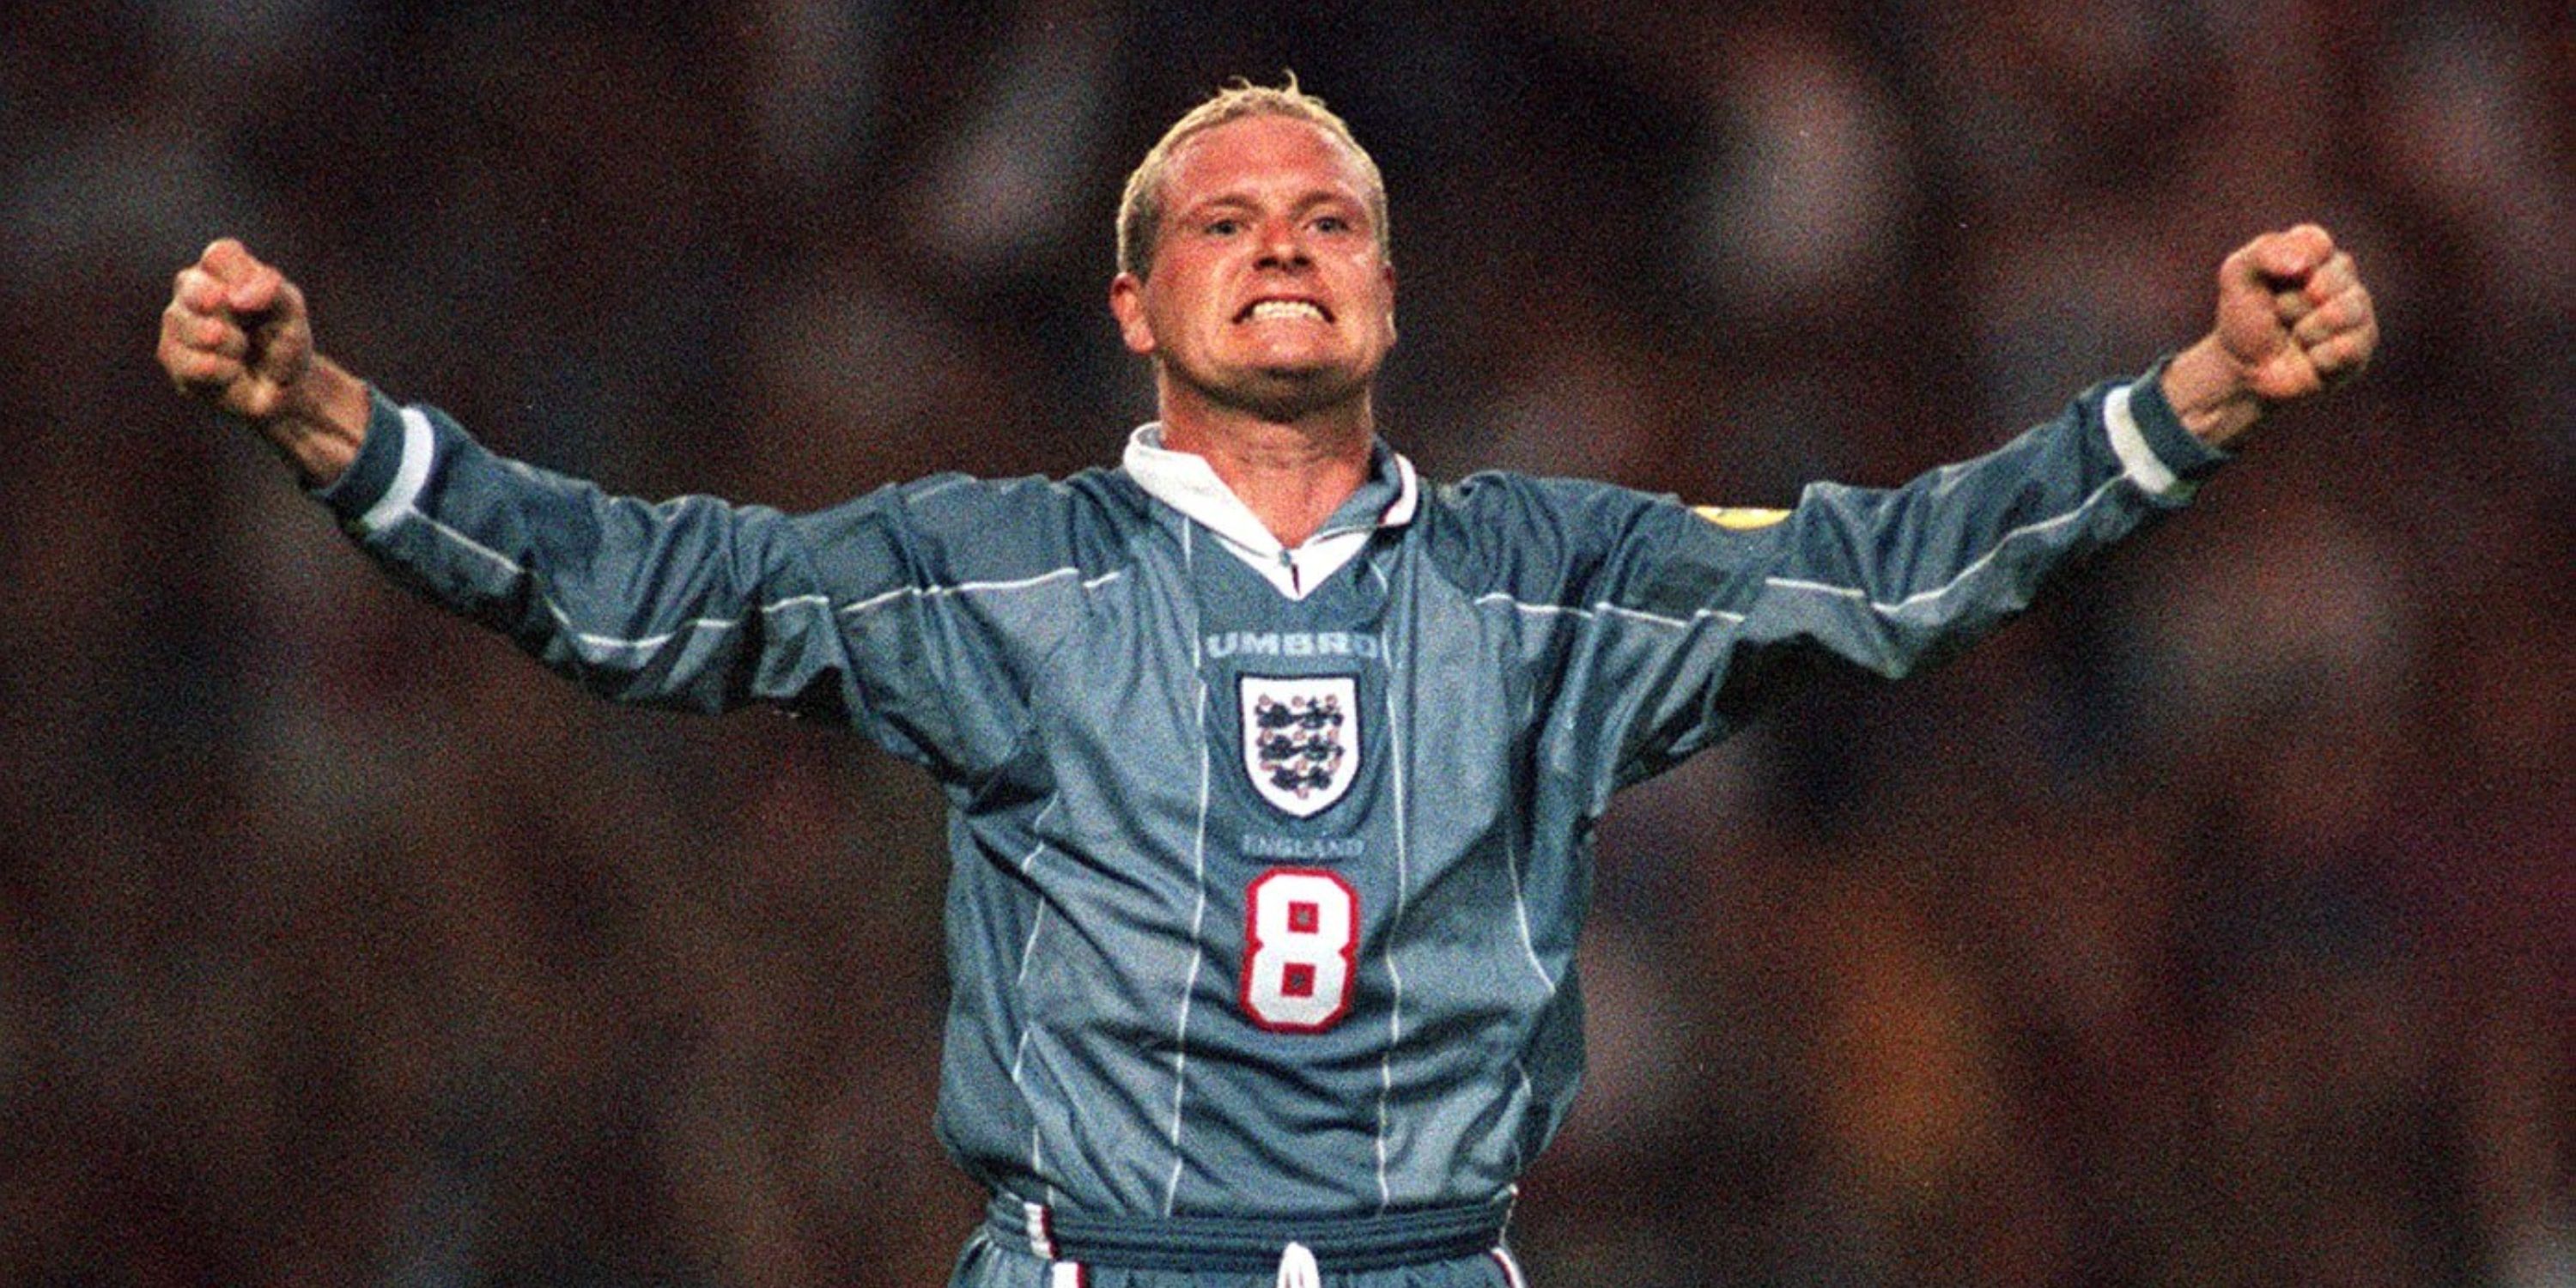 Paul Gascoigne: 5 of the football icon's funniest moments